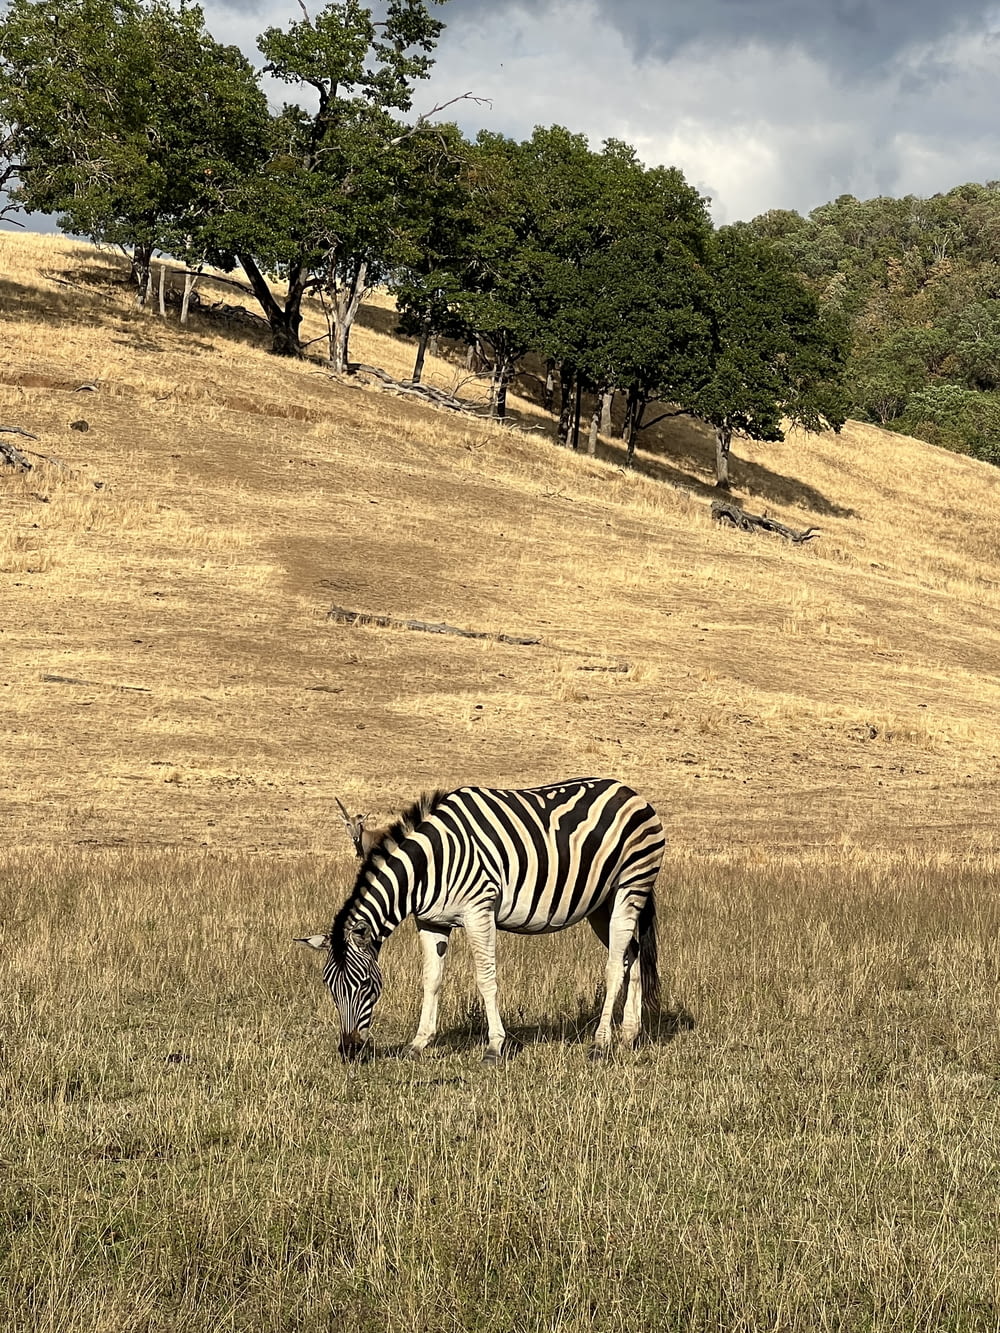 a zebra grazing in a field with trees in the background